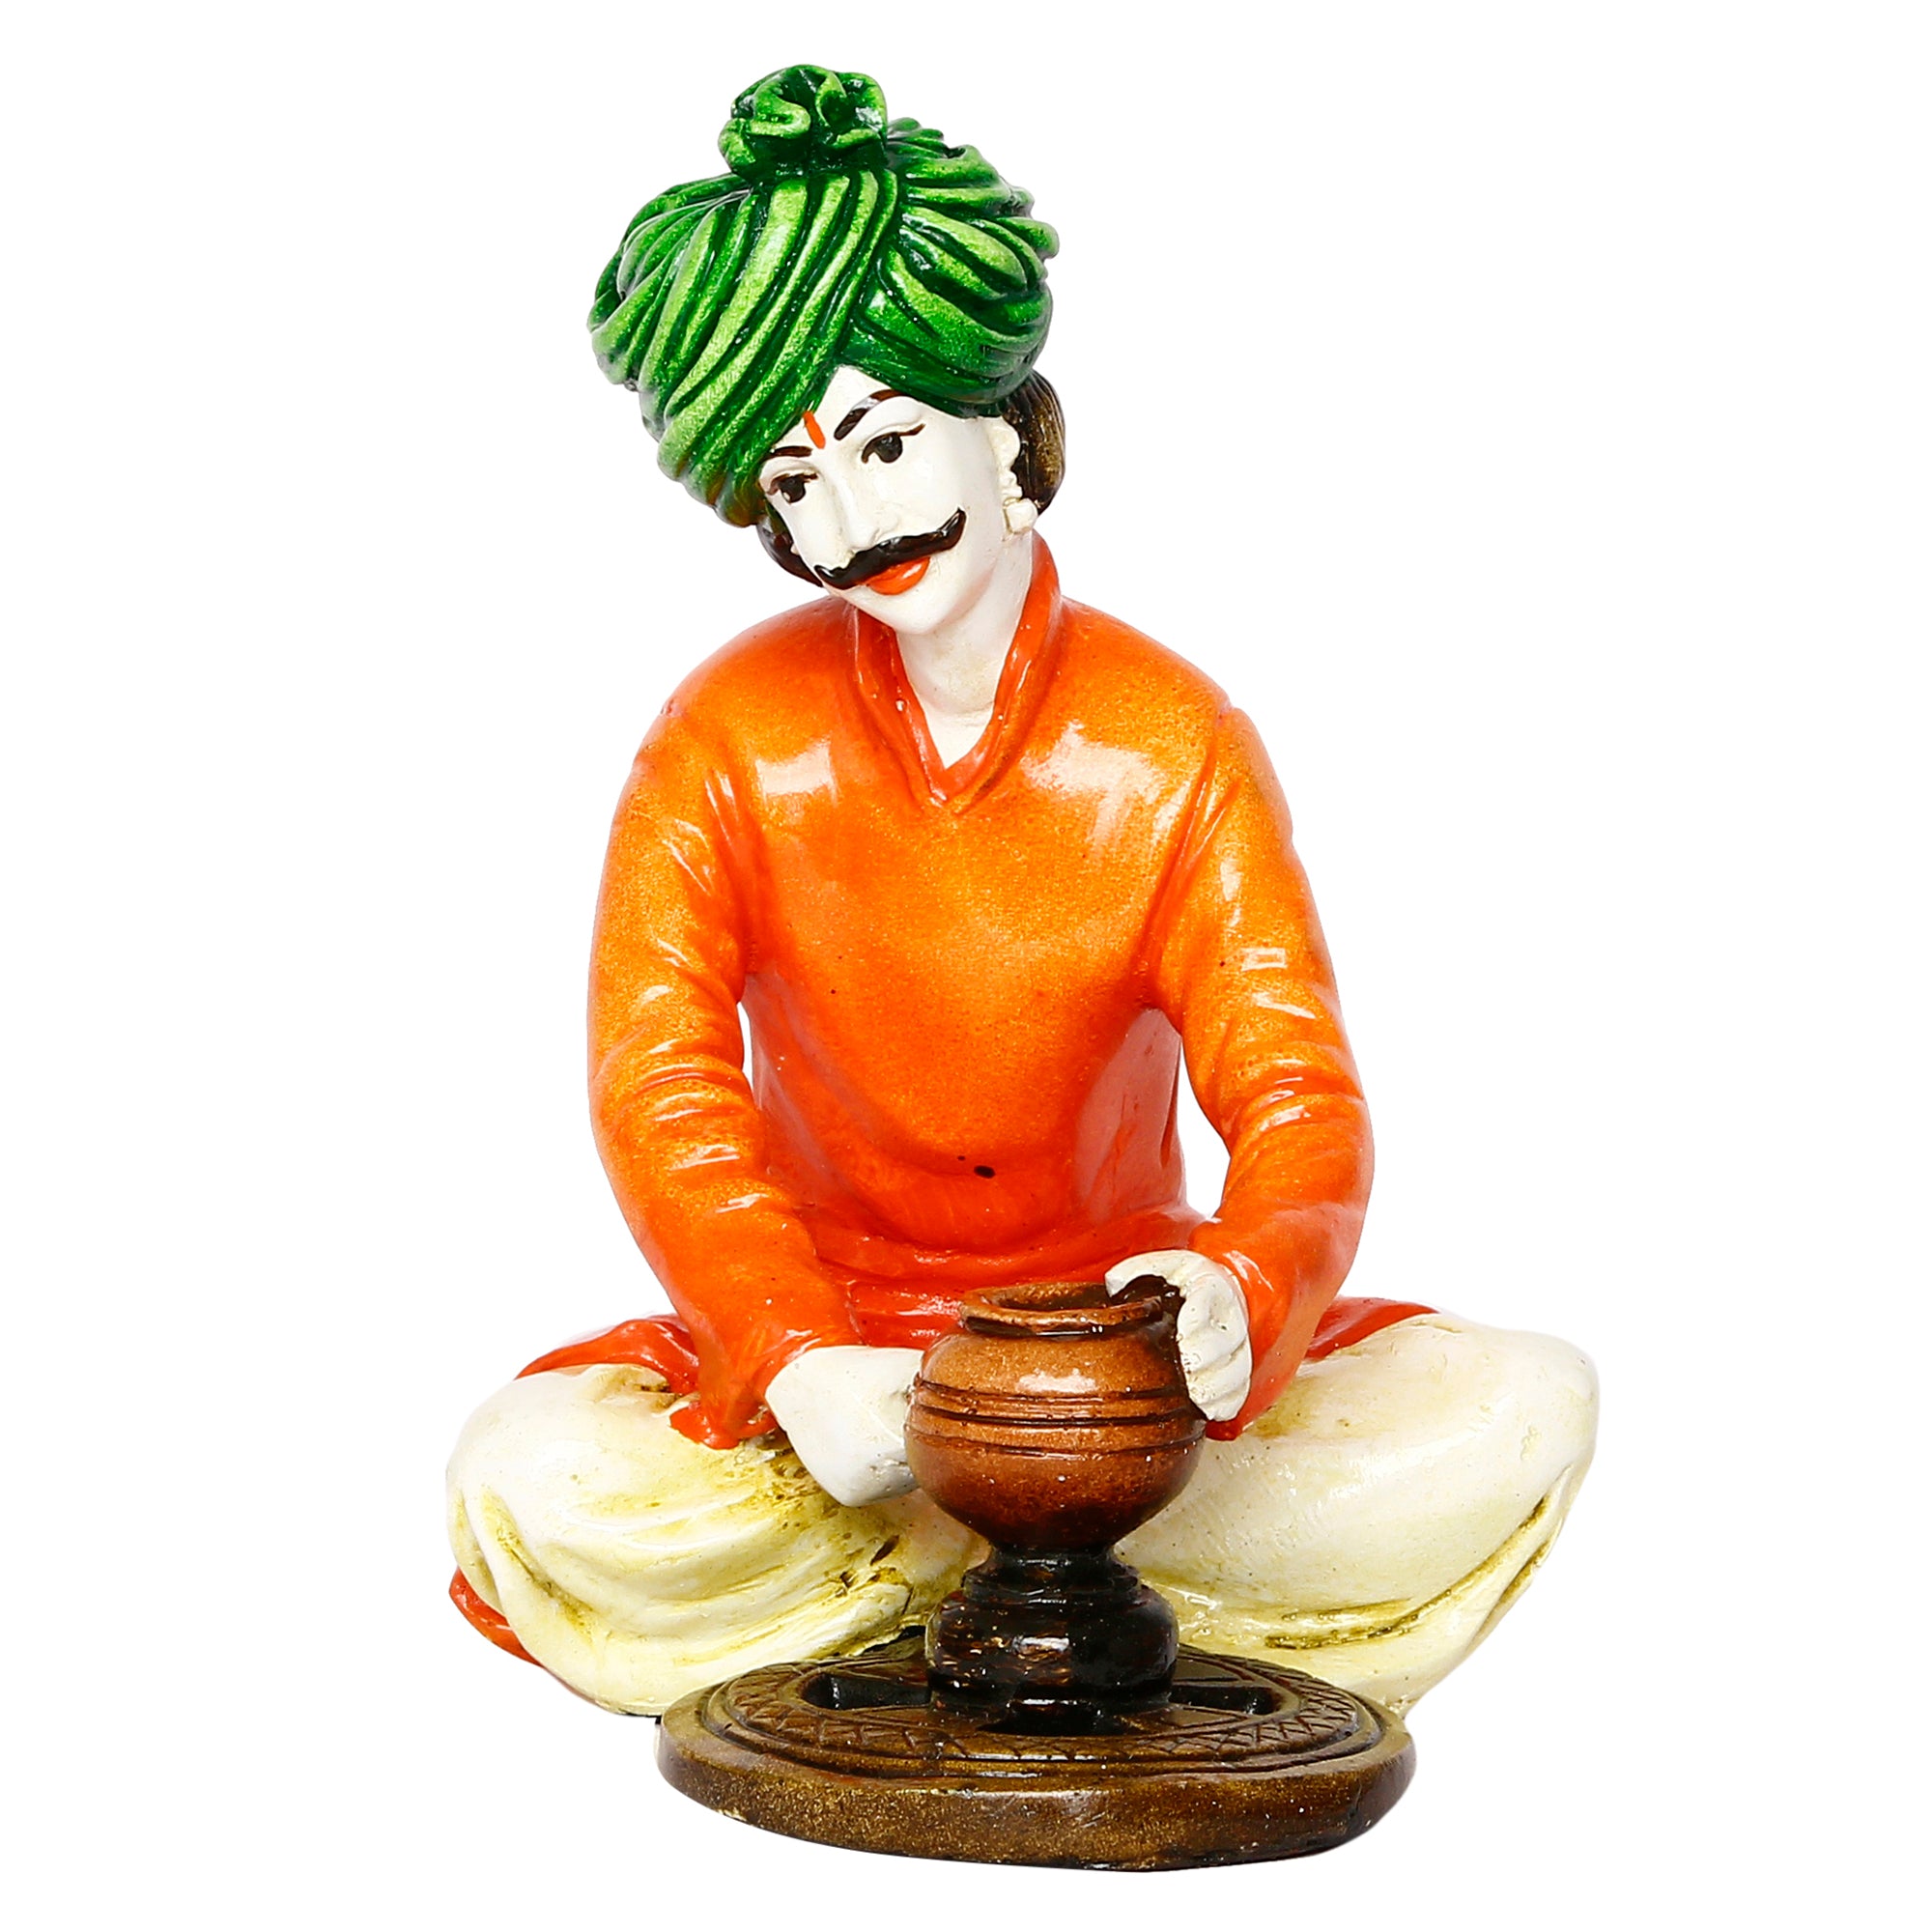 Colorful Rajasthani Man Making Pot Handcrafted Decorative Polyresin Showpiece 2